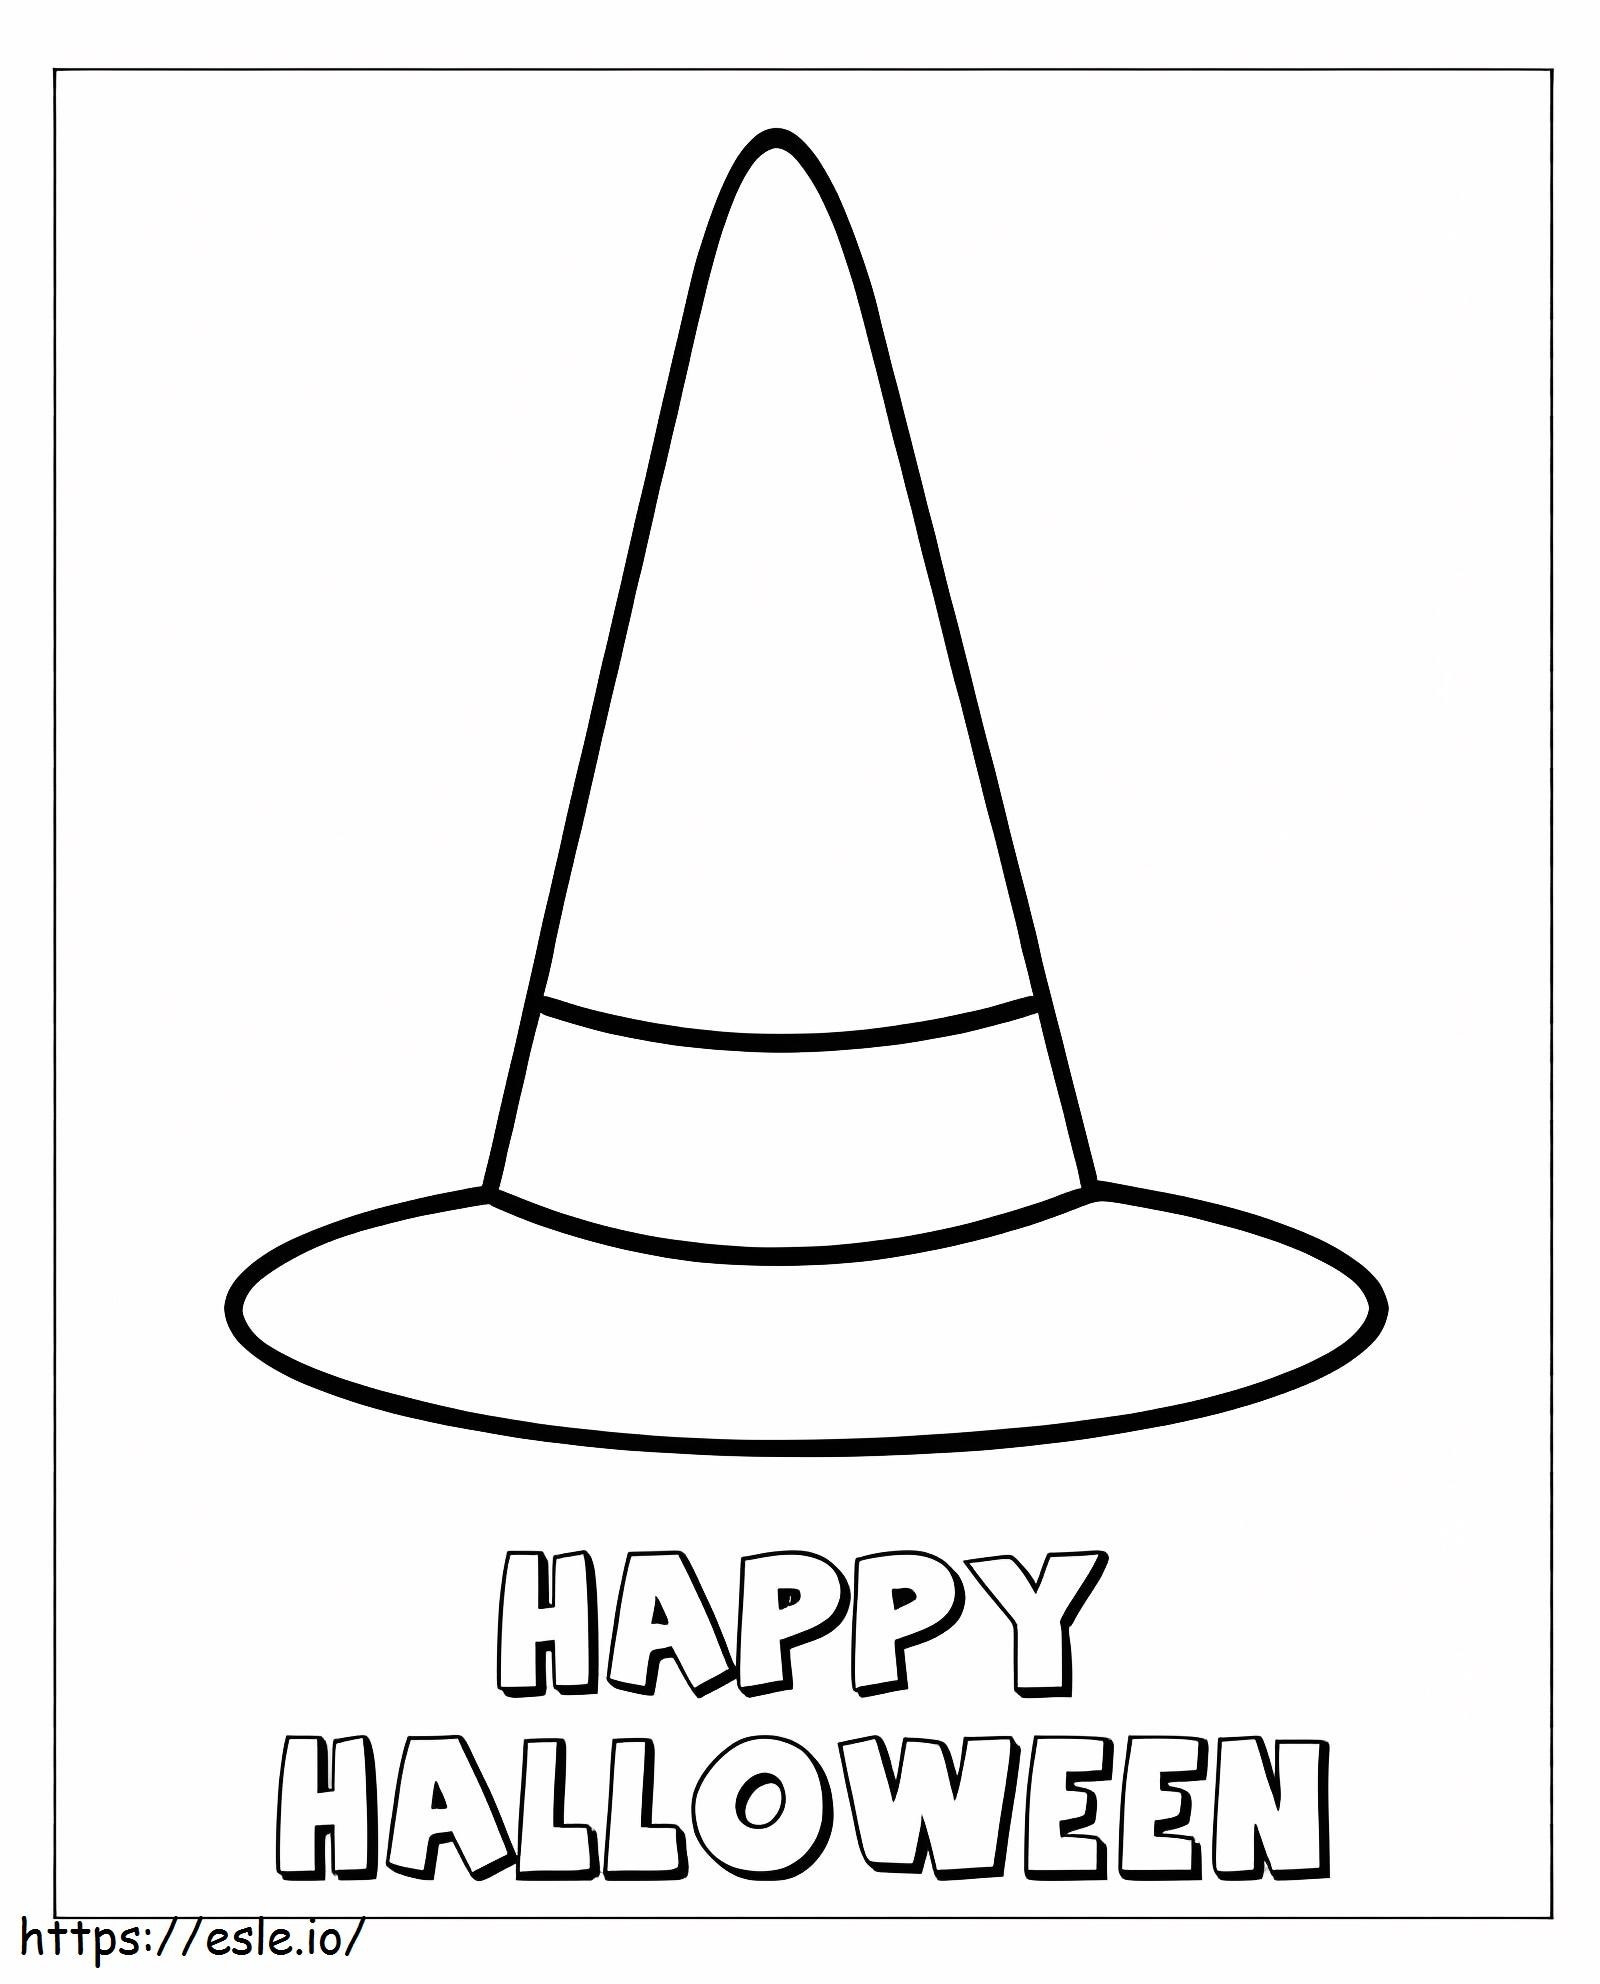 Halloween Witch Hat coloring page